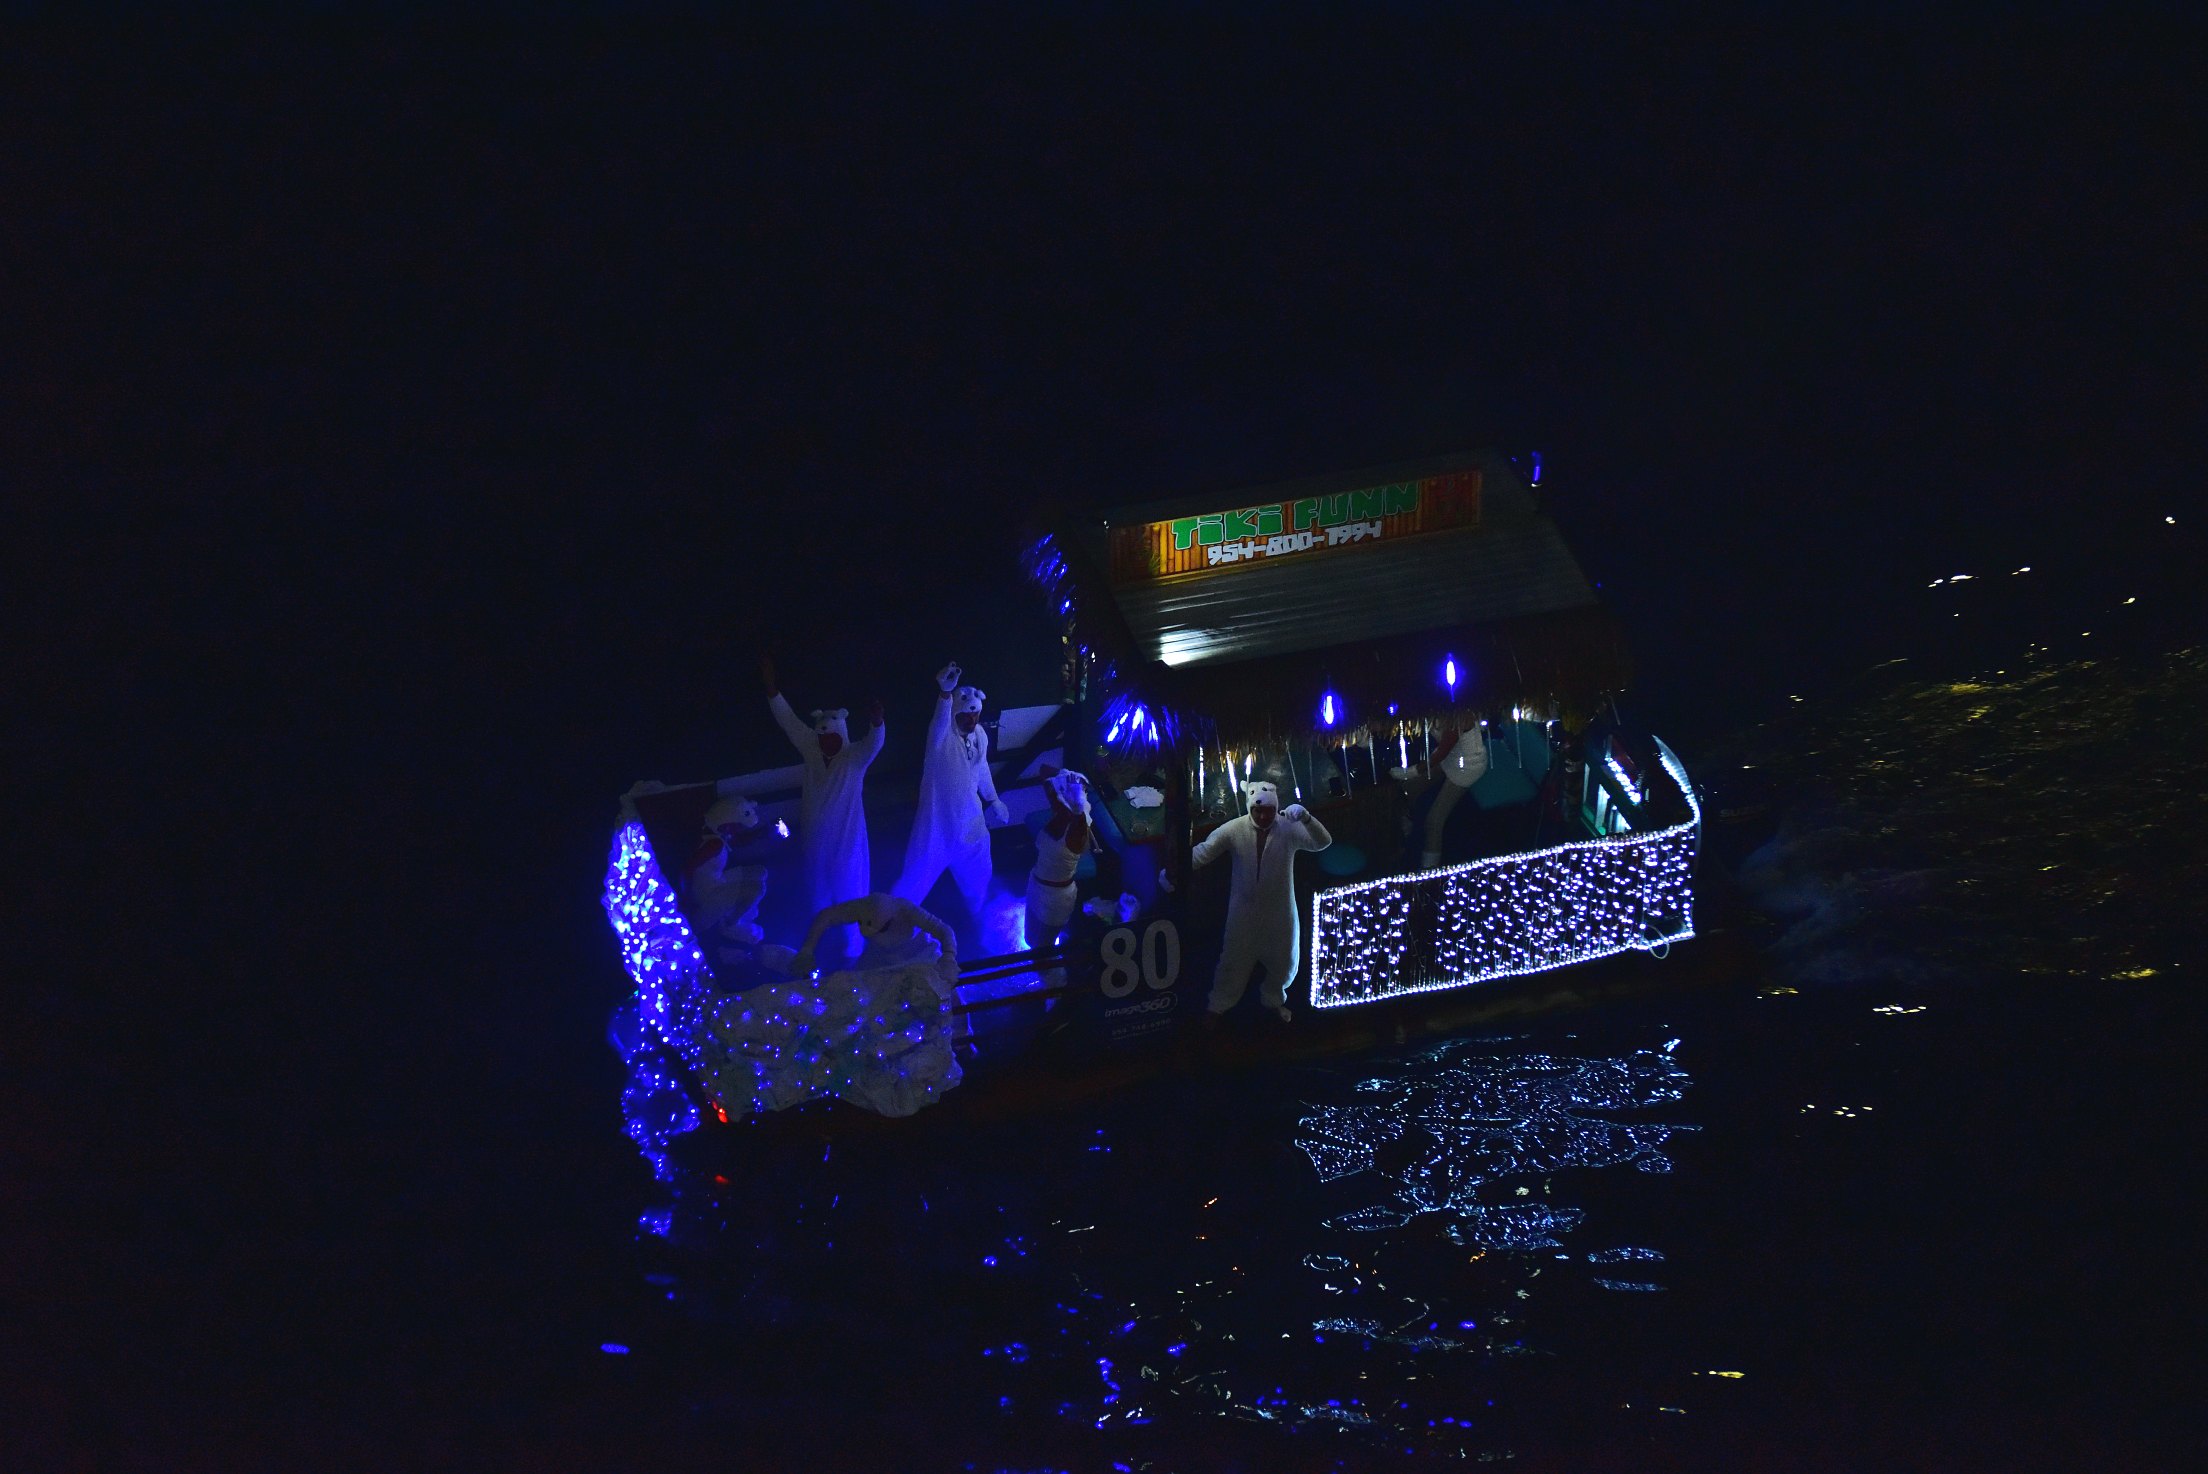 Love Shack, boat number 80 in the 2021 Winterfest Boat Parade